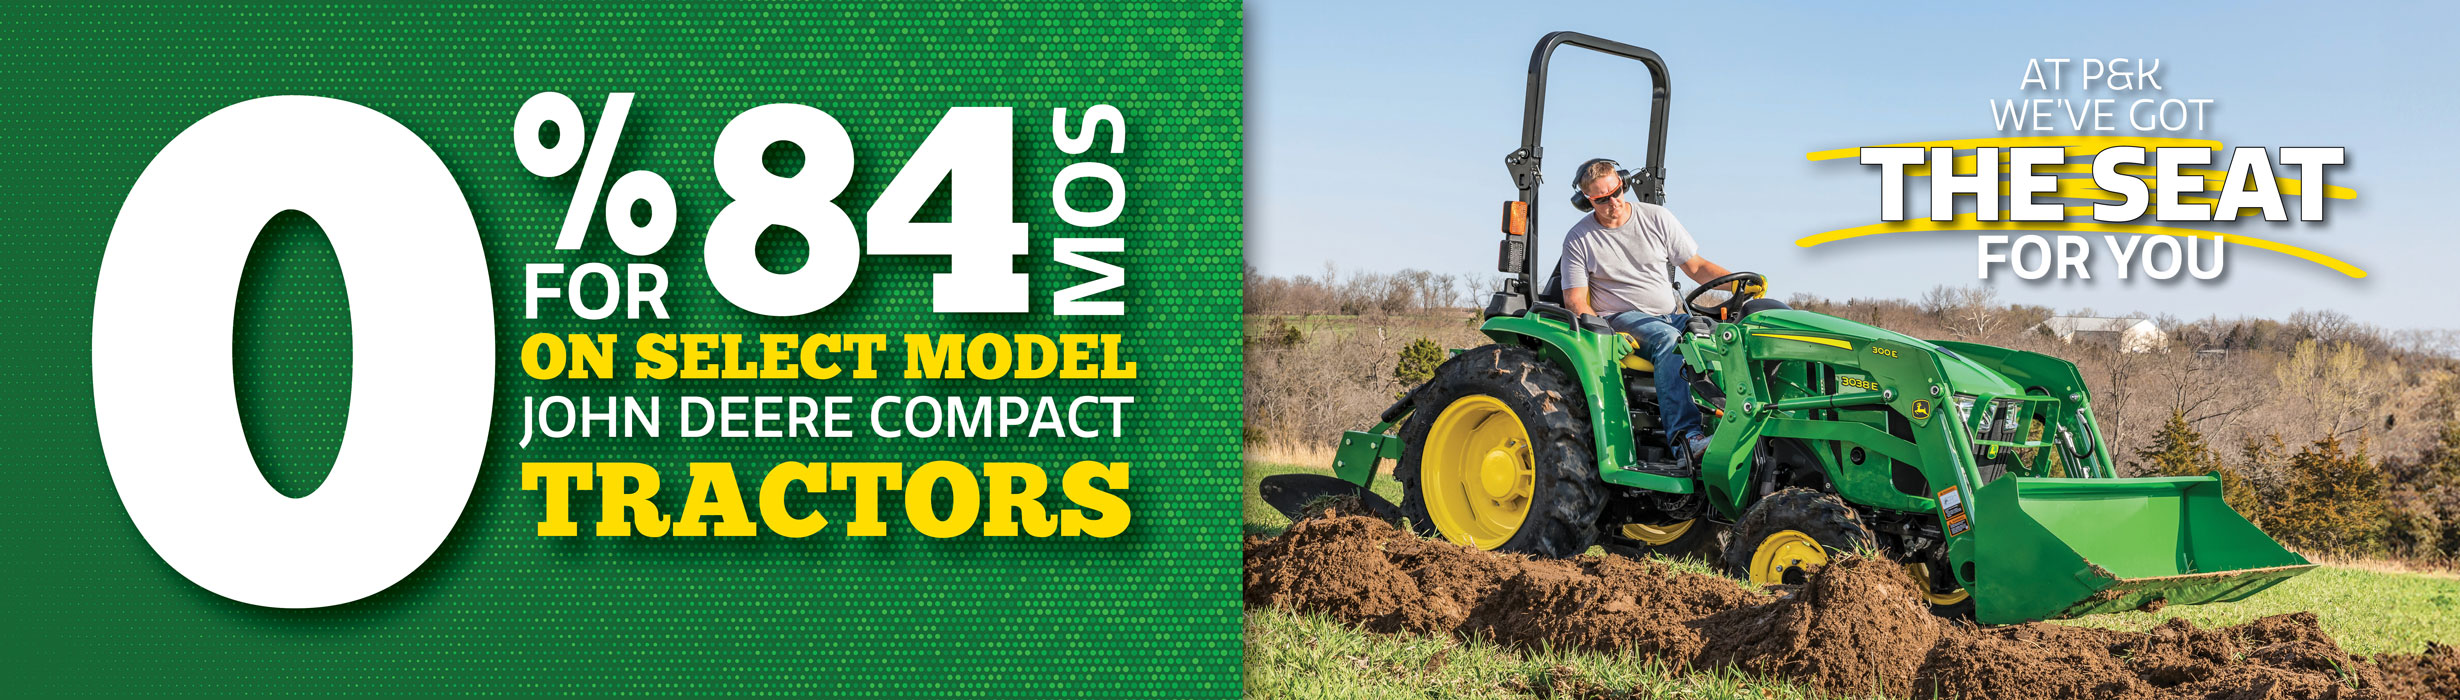 get 0% for 84 months on select model John Deere compact tractors!